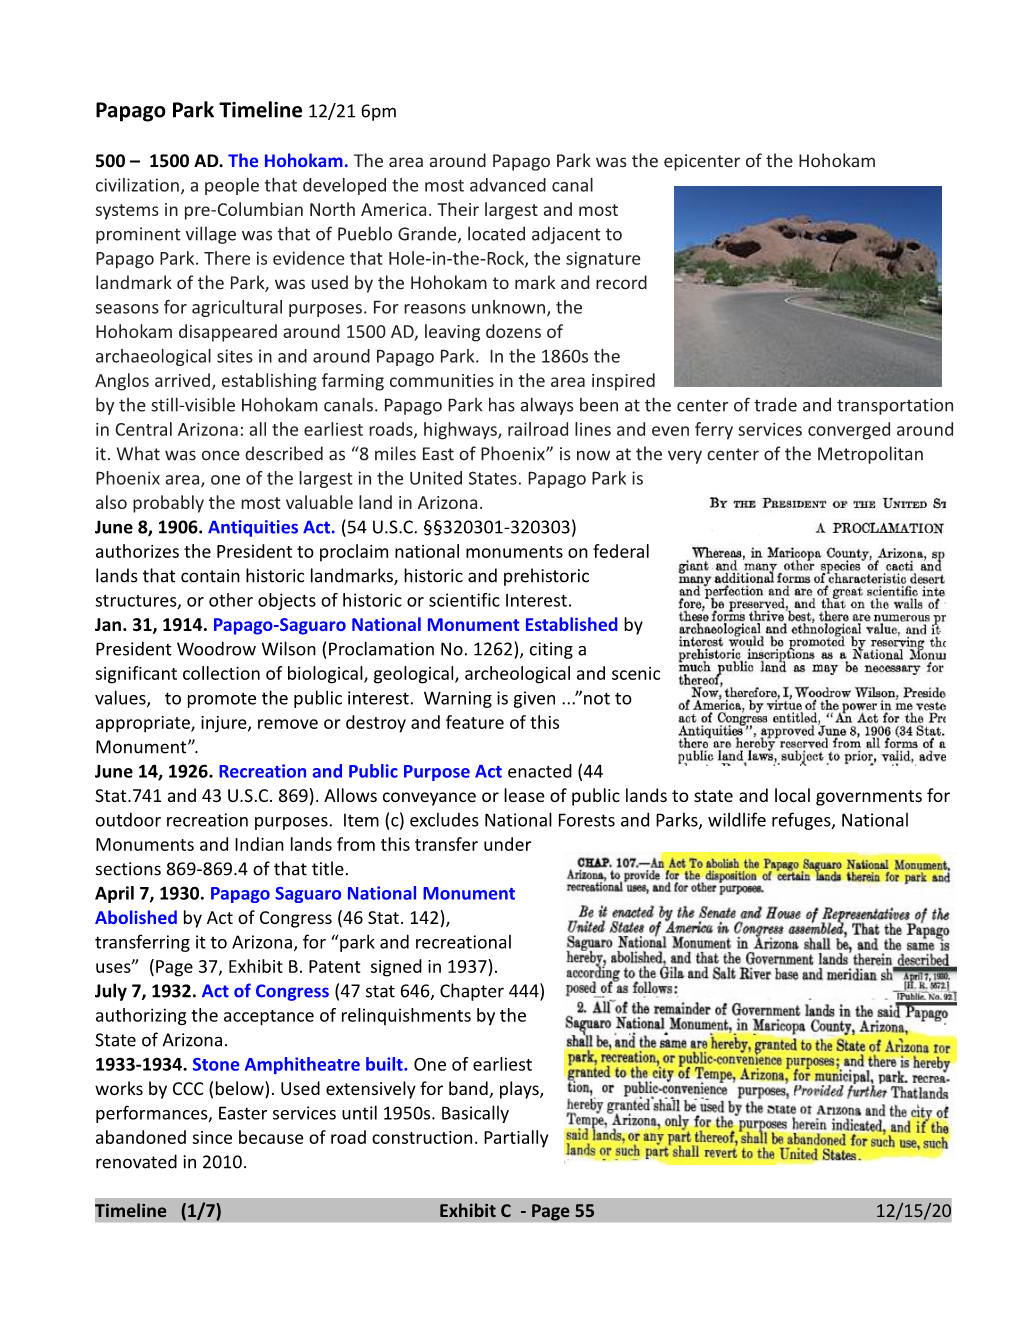 Timeline for Papago Park